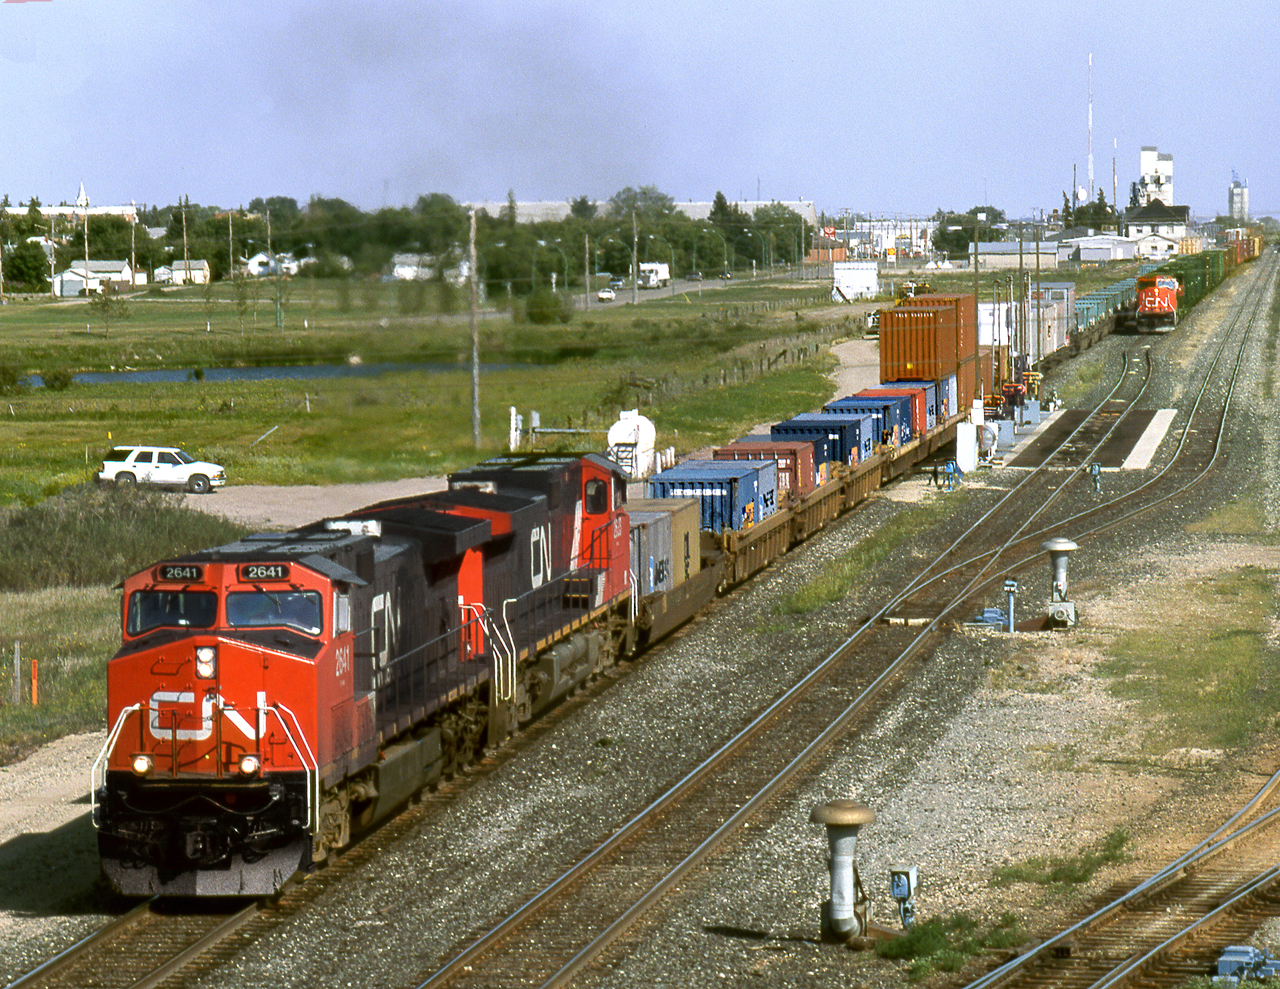 Train 113 departs Melville yard after crew change and fueling while train 357 on adjacent track pulls up to the fuel racks